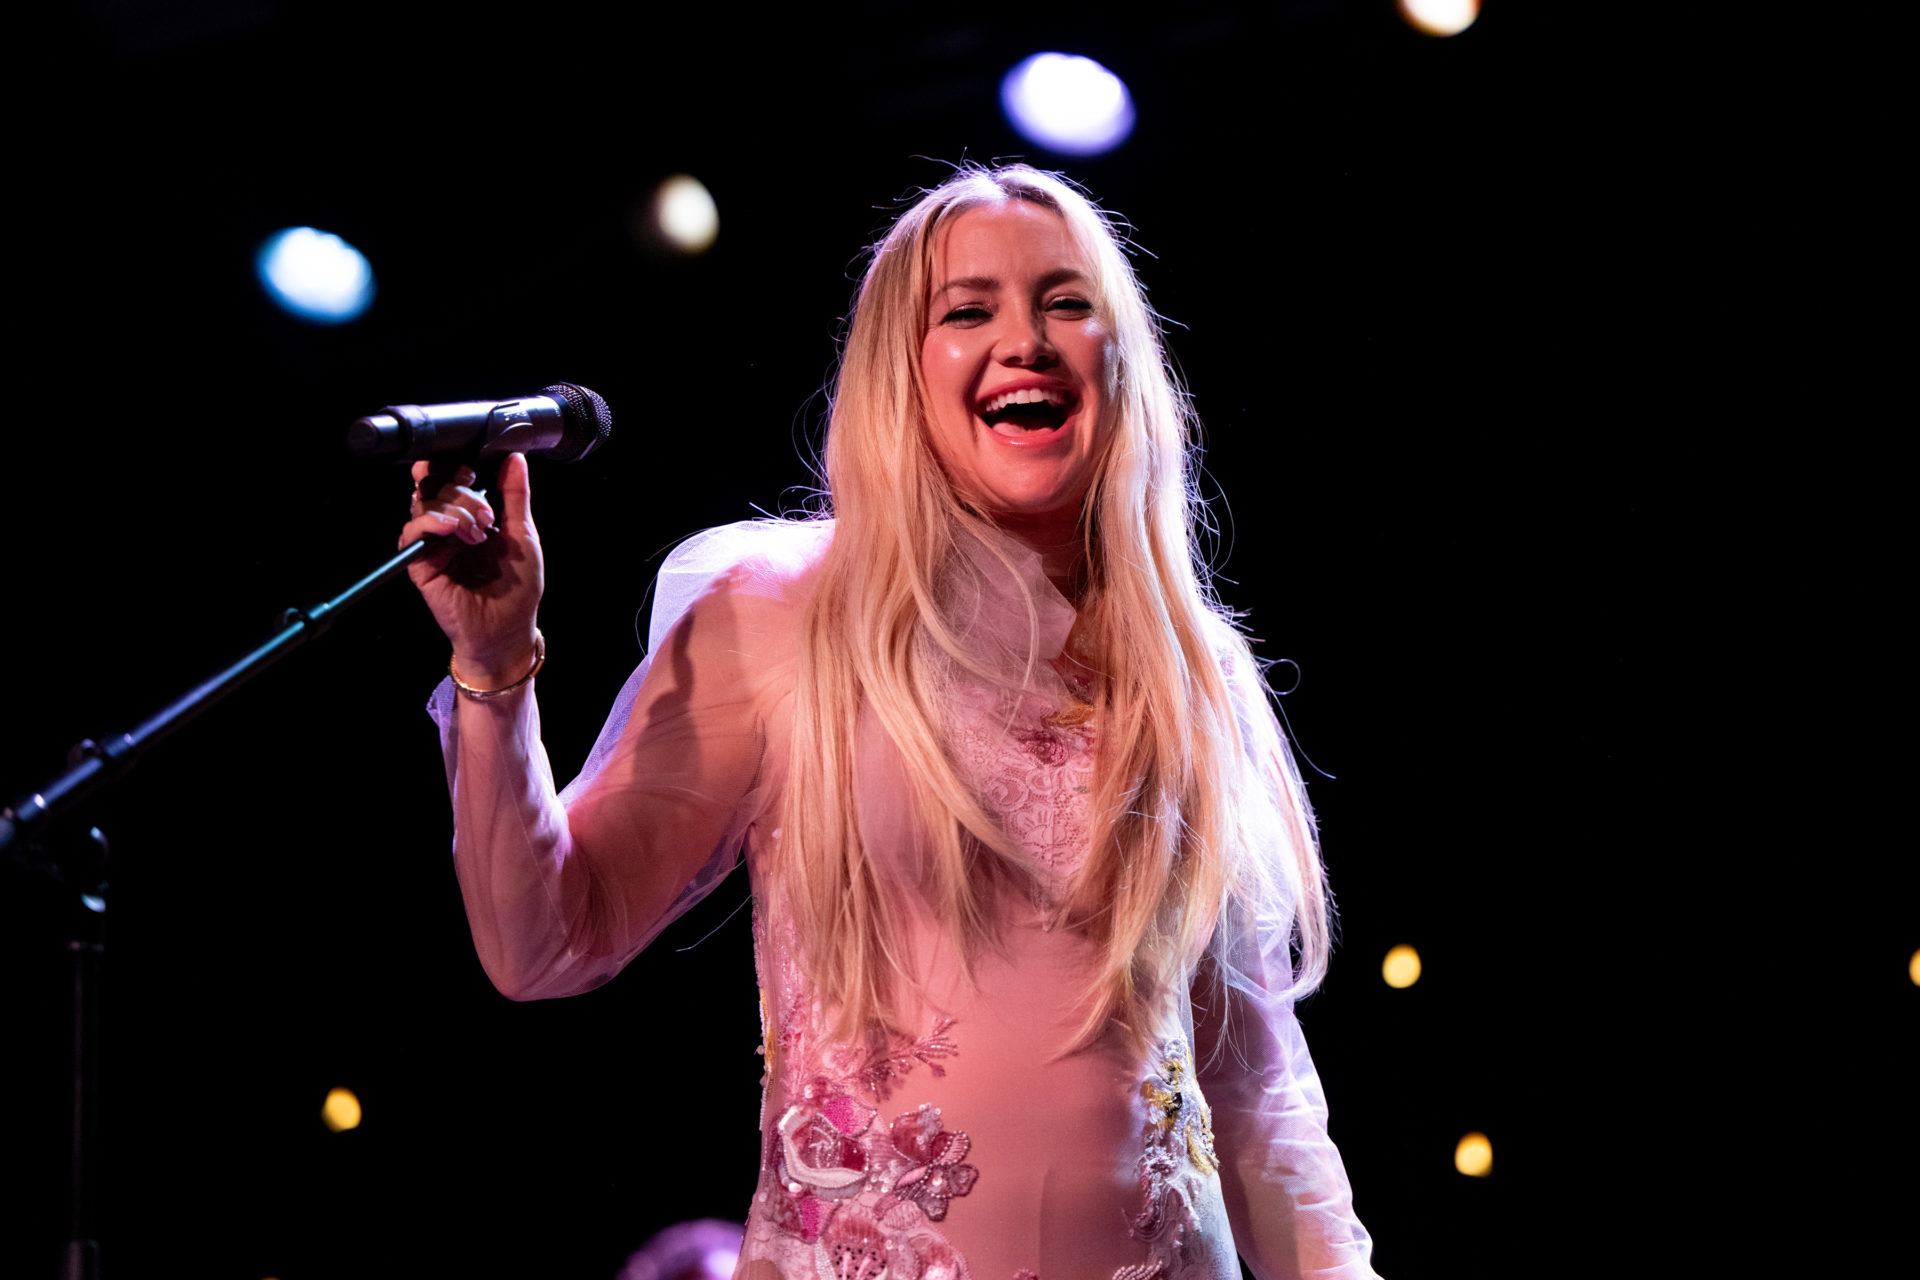 Iconic Moment: Kate Hudson's 'Glorious' Act Lights Up 'The Voice' Season Finale